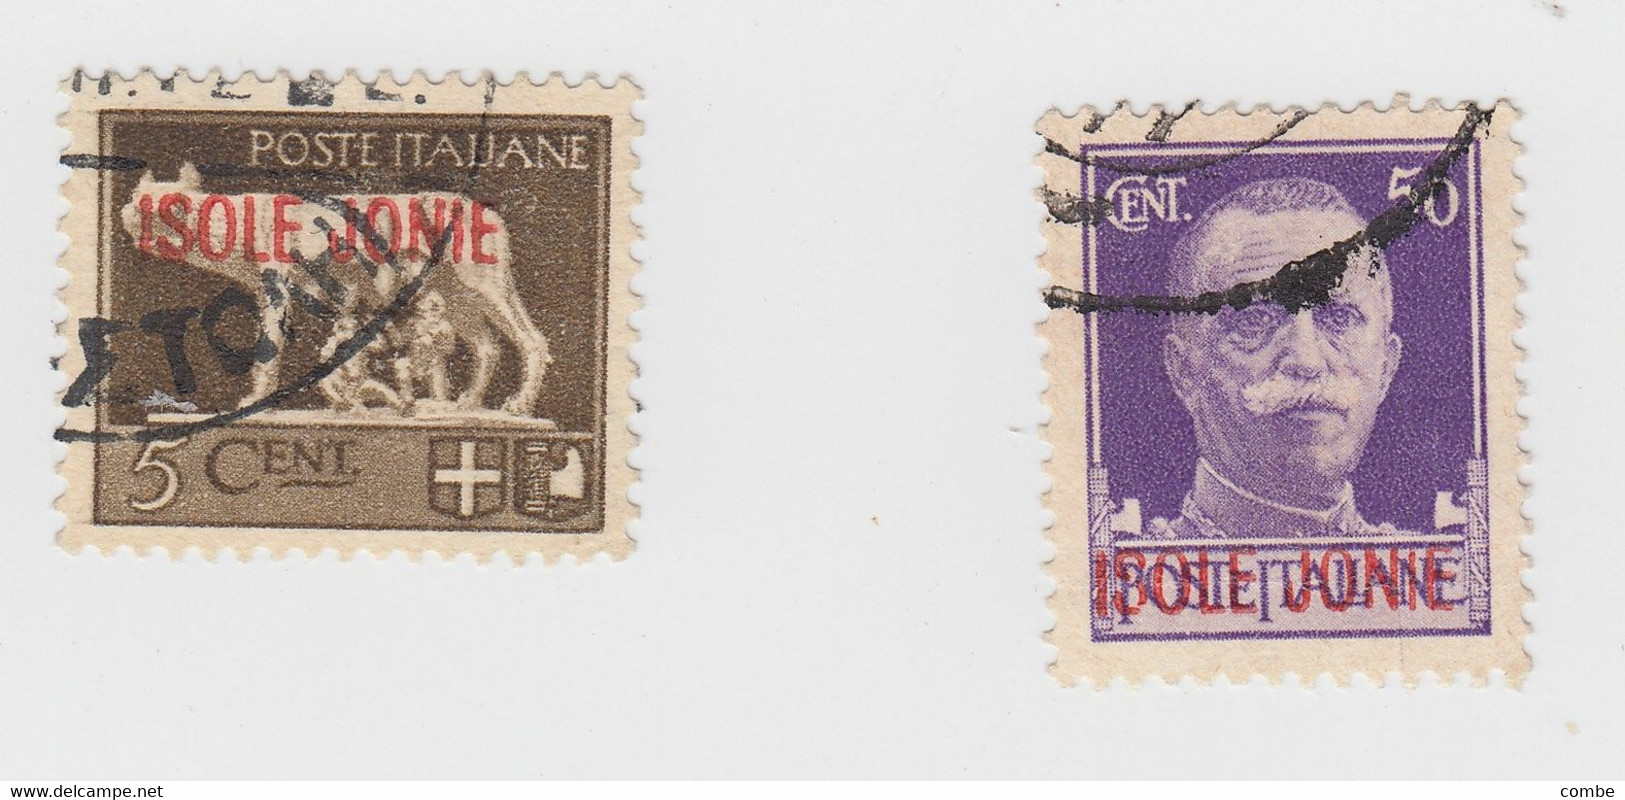 ISOLE JONIE. 2 STAMPS  / 7157 - Ionian Islands